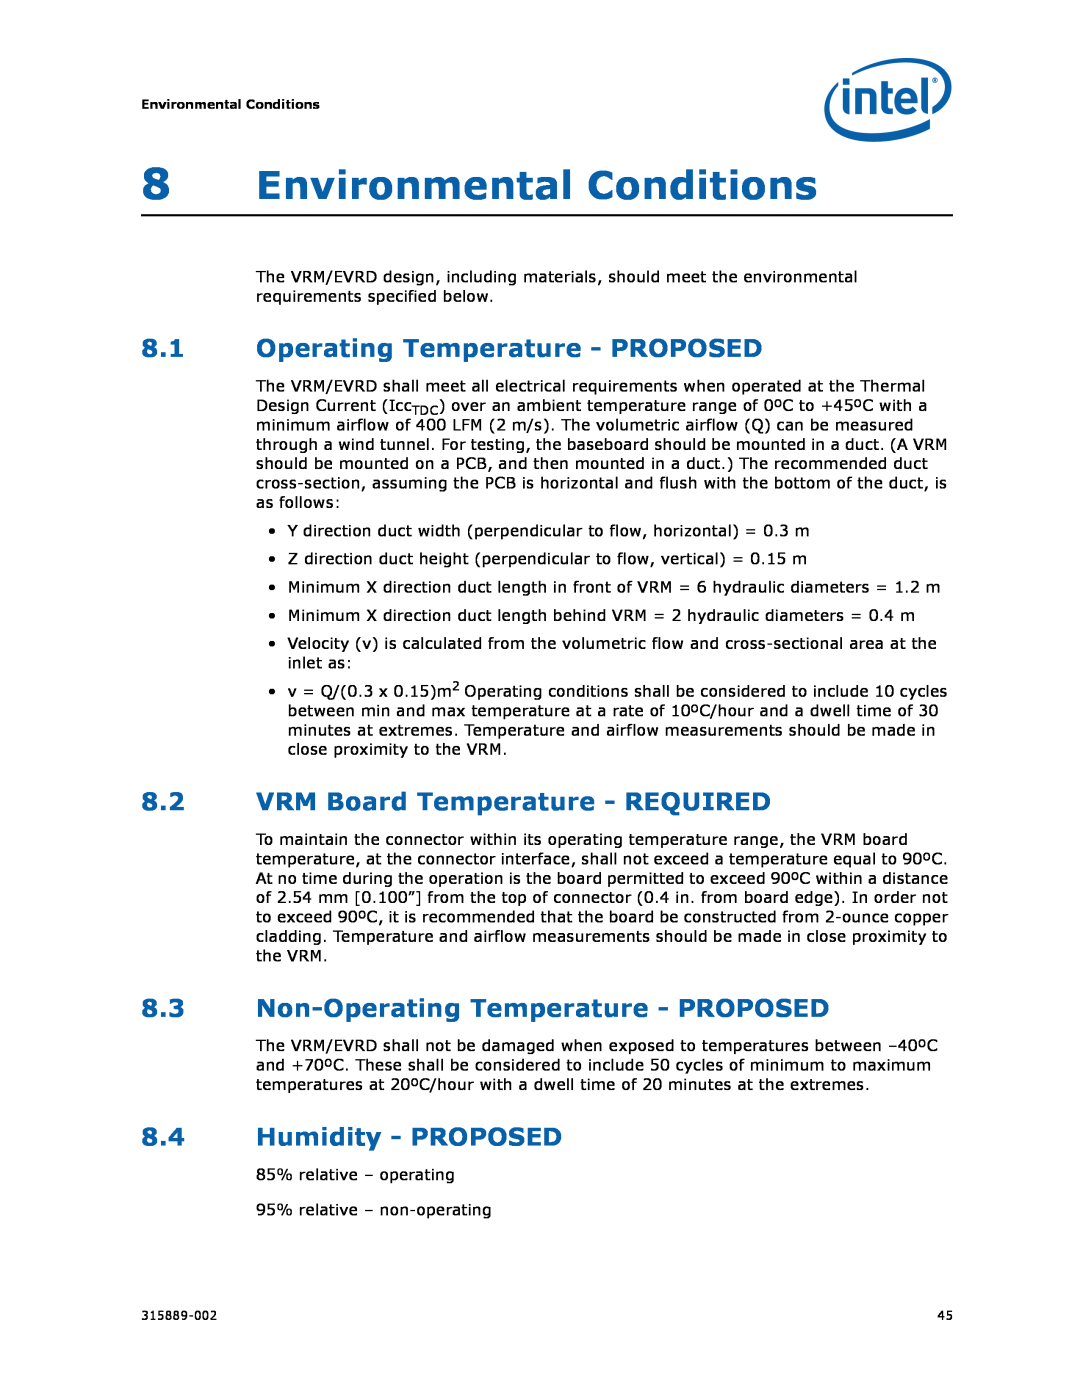 Intel 315889-002 manual 8Environmental Conditions, 8.1Operating Temperature - PROPOSED, 8.2VRM Board Temperature - REQUIRED 